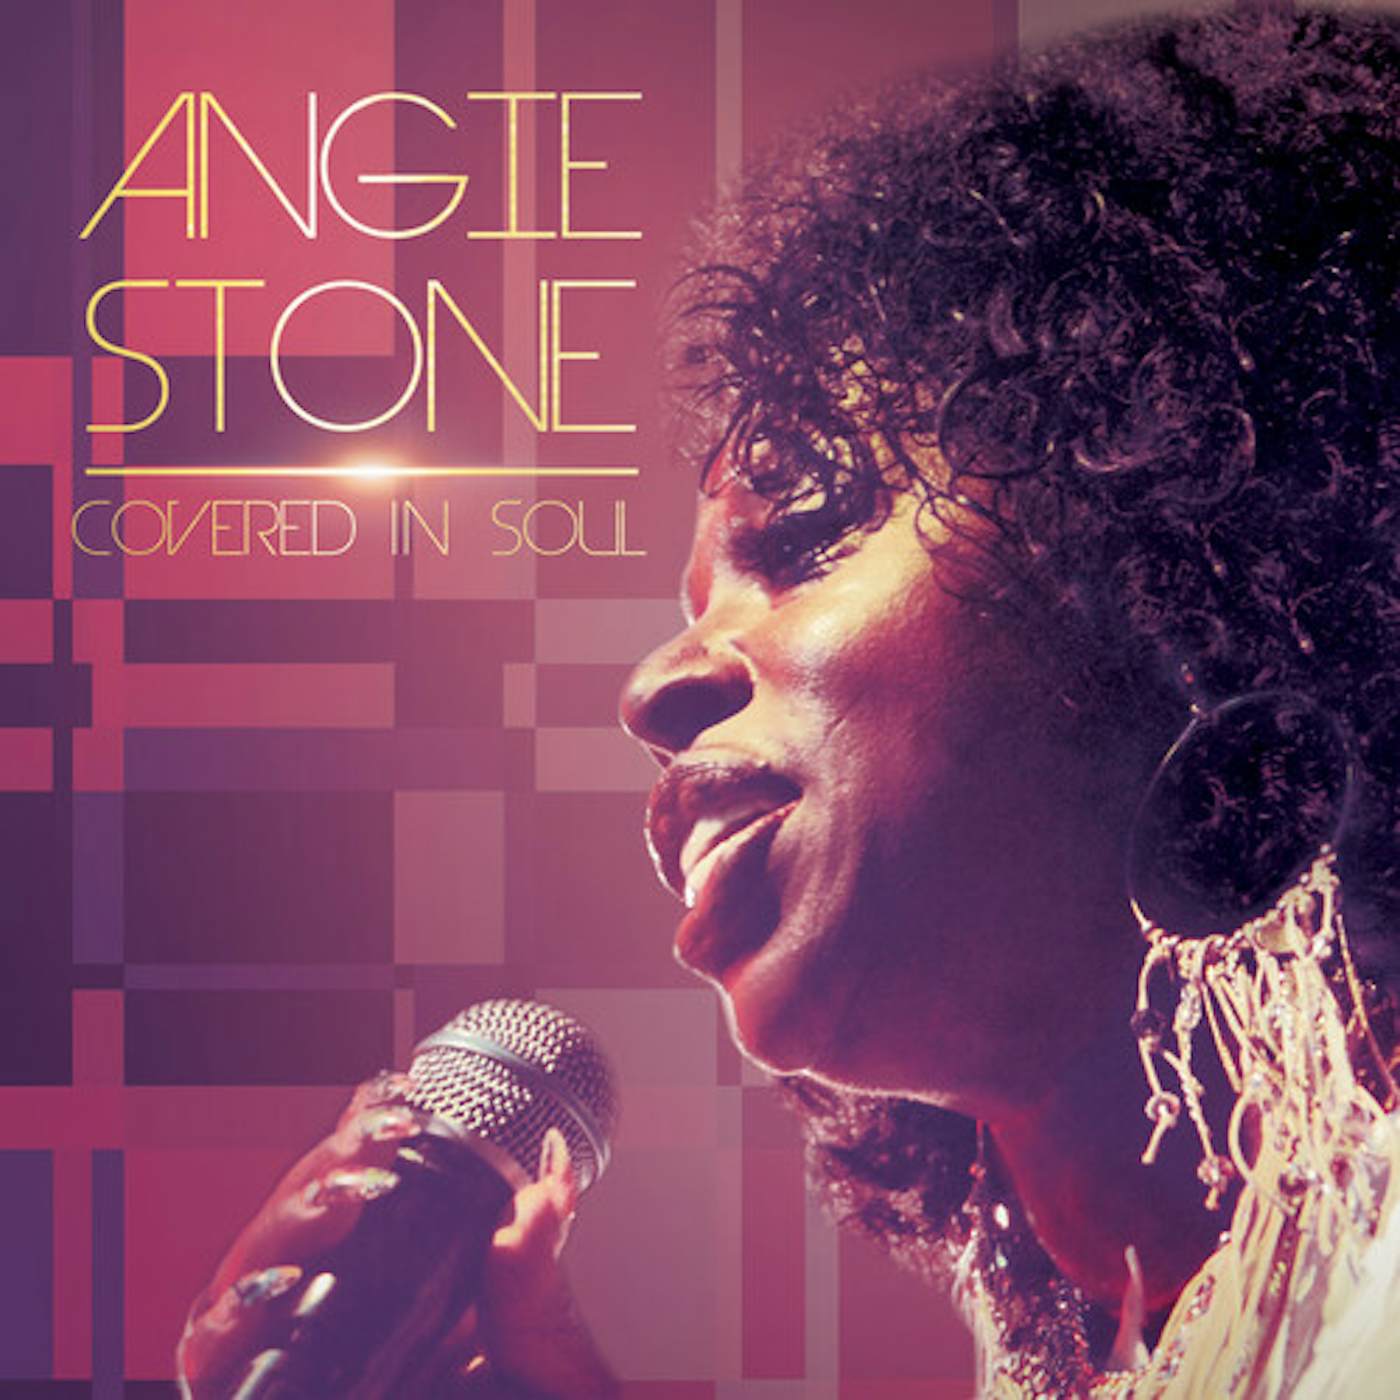 Angie Stone Covered In Soul - Purple Vinyl Record